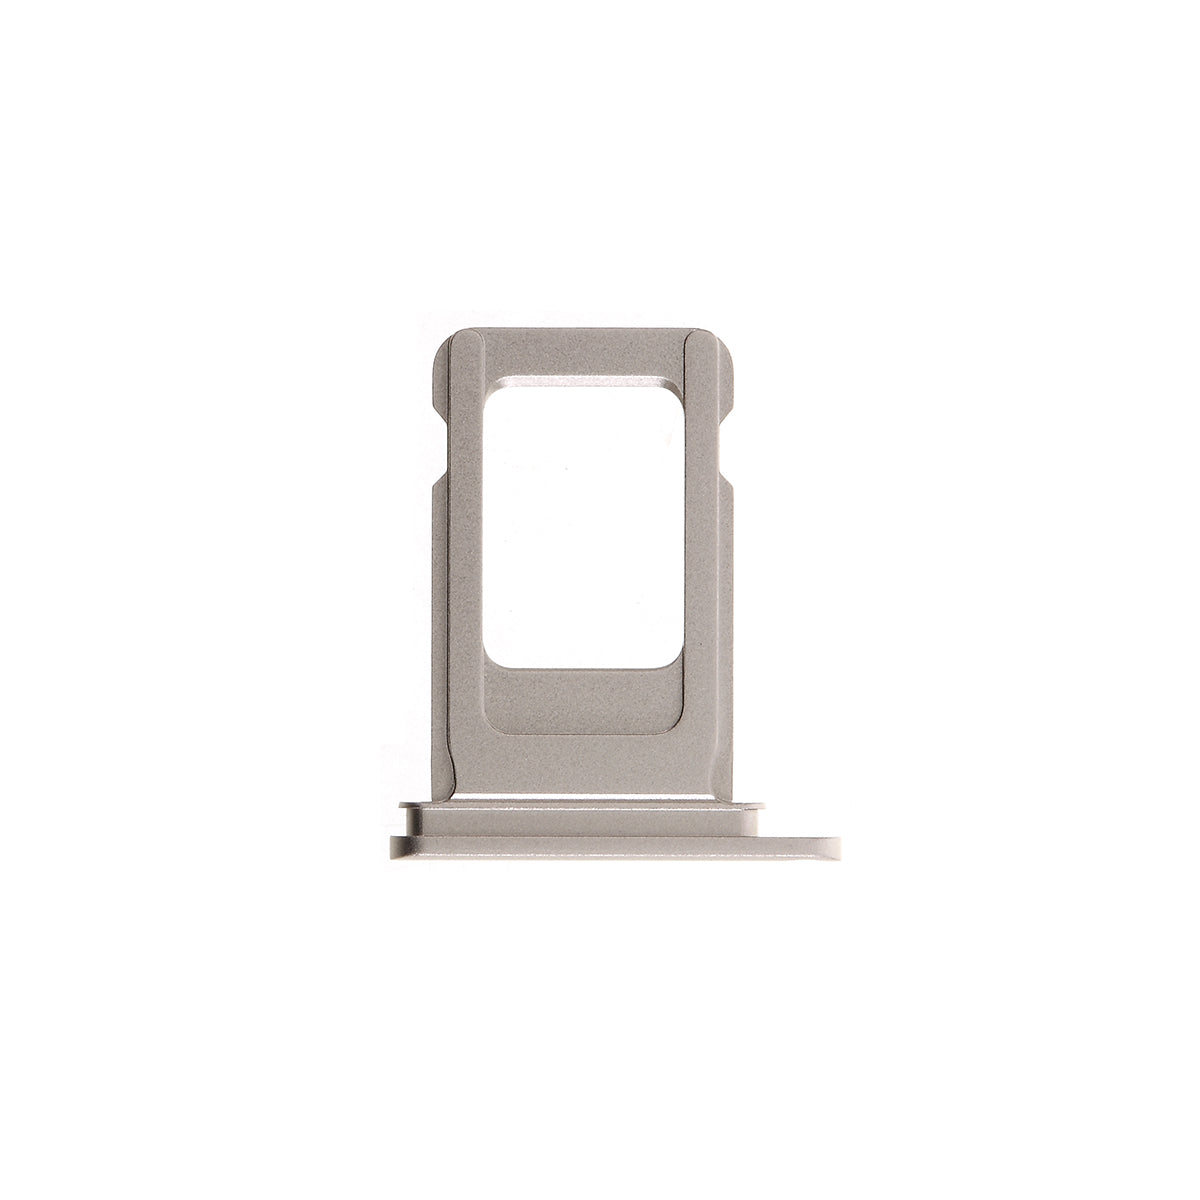 OEM SIM Card Tray Holder Replace Part for Apple iPhone 11 6.1 inch - White